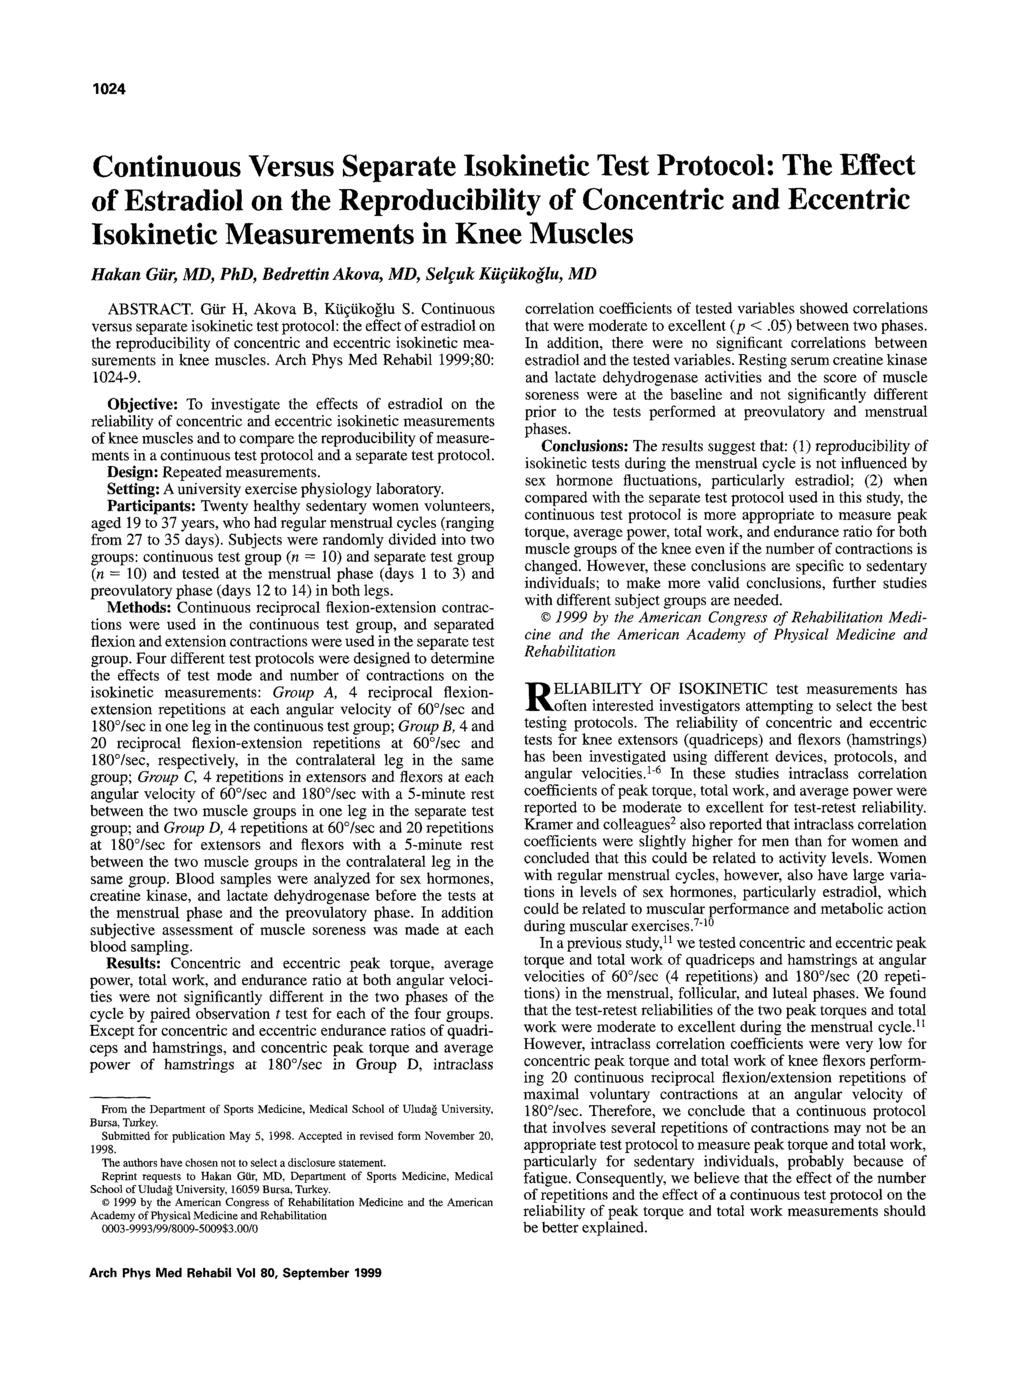 1024 Continuous Versus Separate Isokinetic Test Protocol: The Effect of Estradiol on the Reproducibility of Concentric and Eccentric Isokinetic Measurements in Knee Muscles Hakan Giir, MD, PhD,